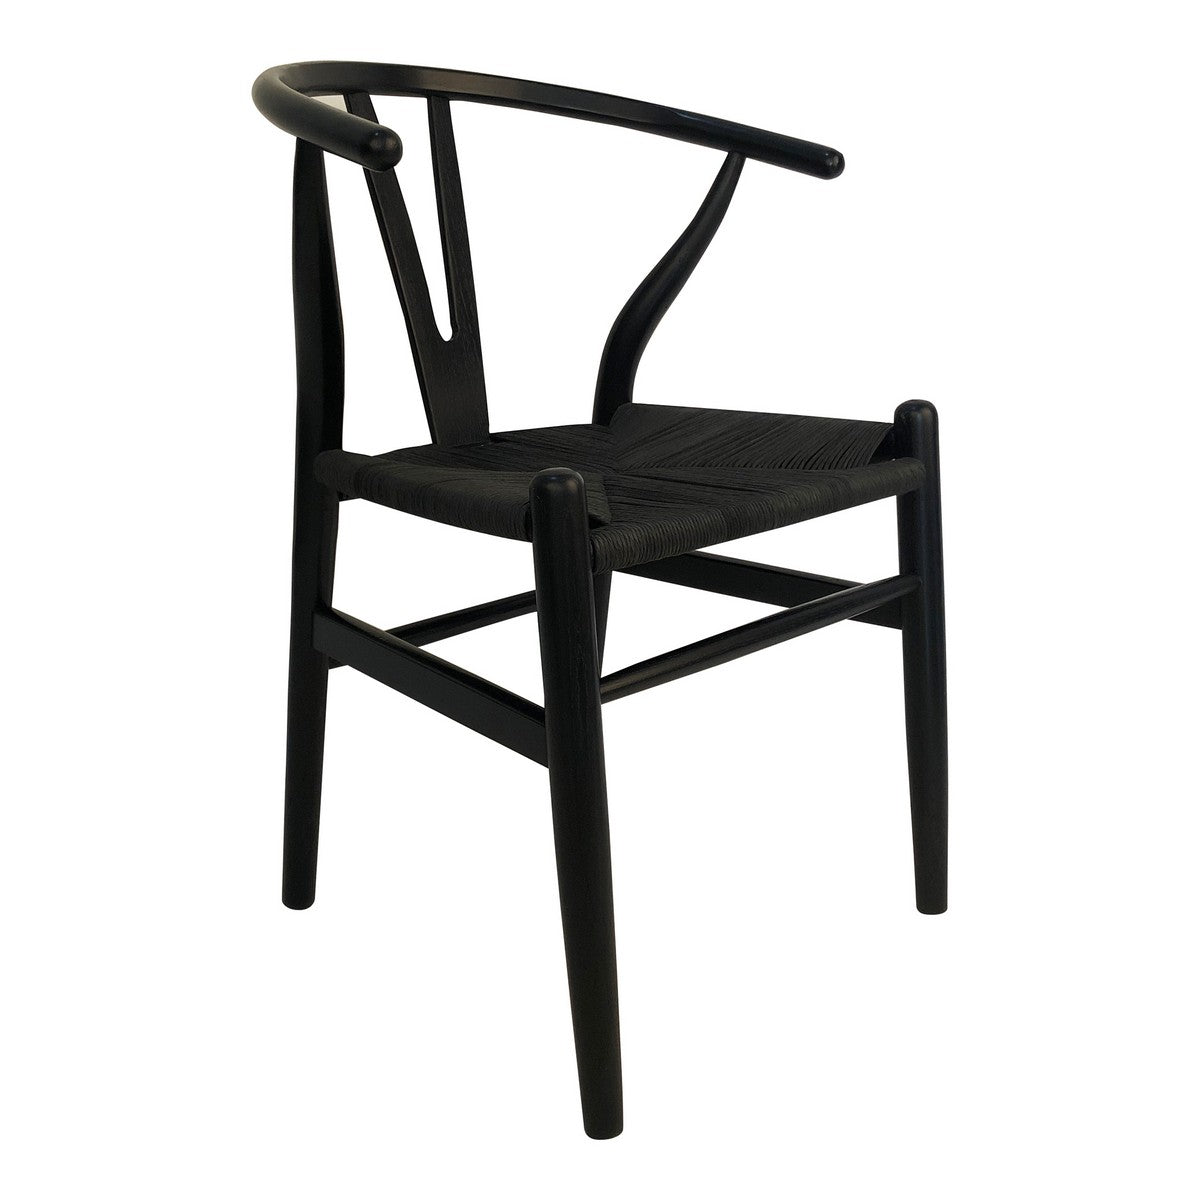 Moe's Home Collection Ventana Dining Chair Black-Set of Two - FG-1015-02